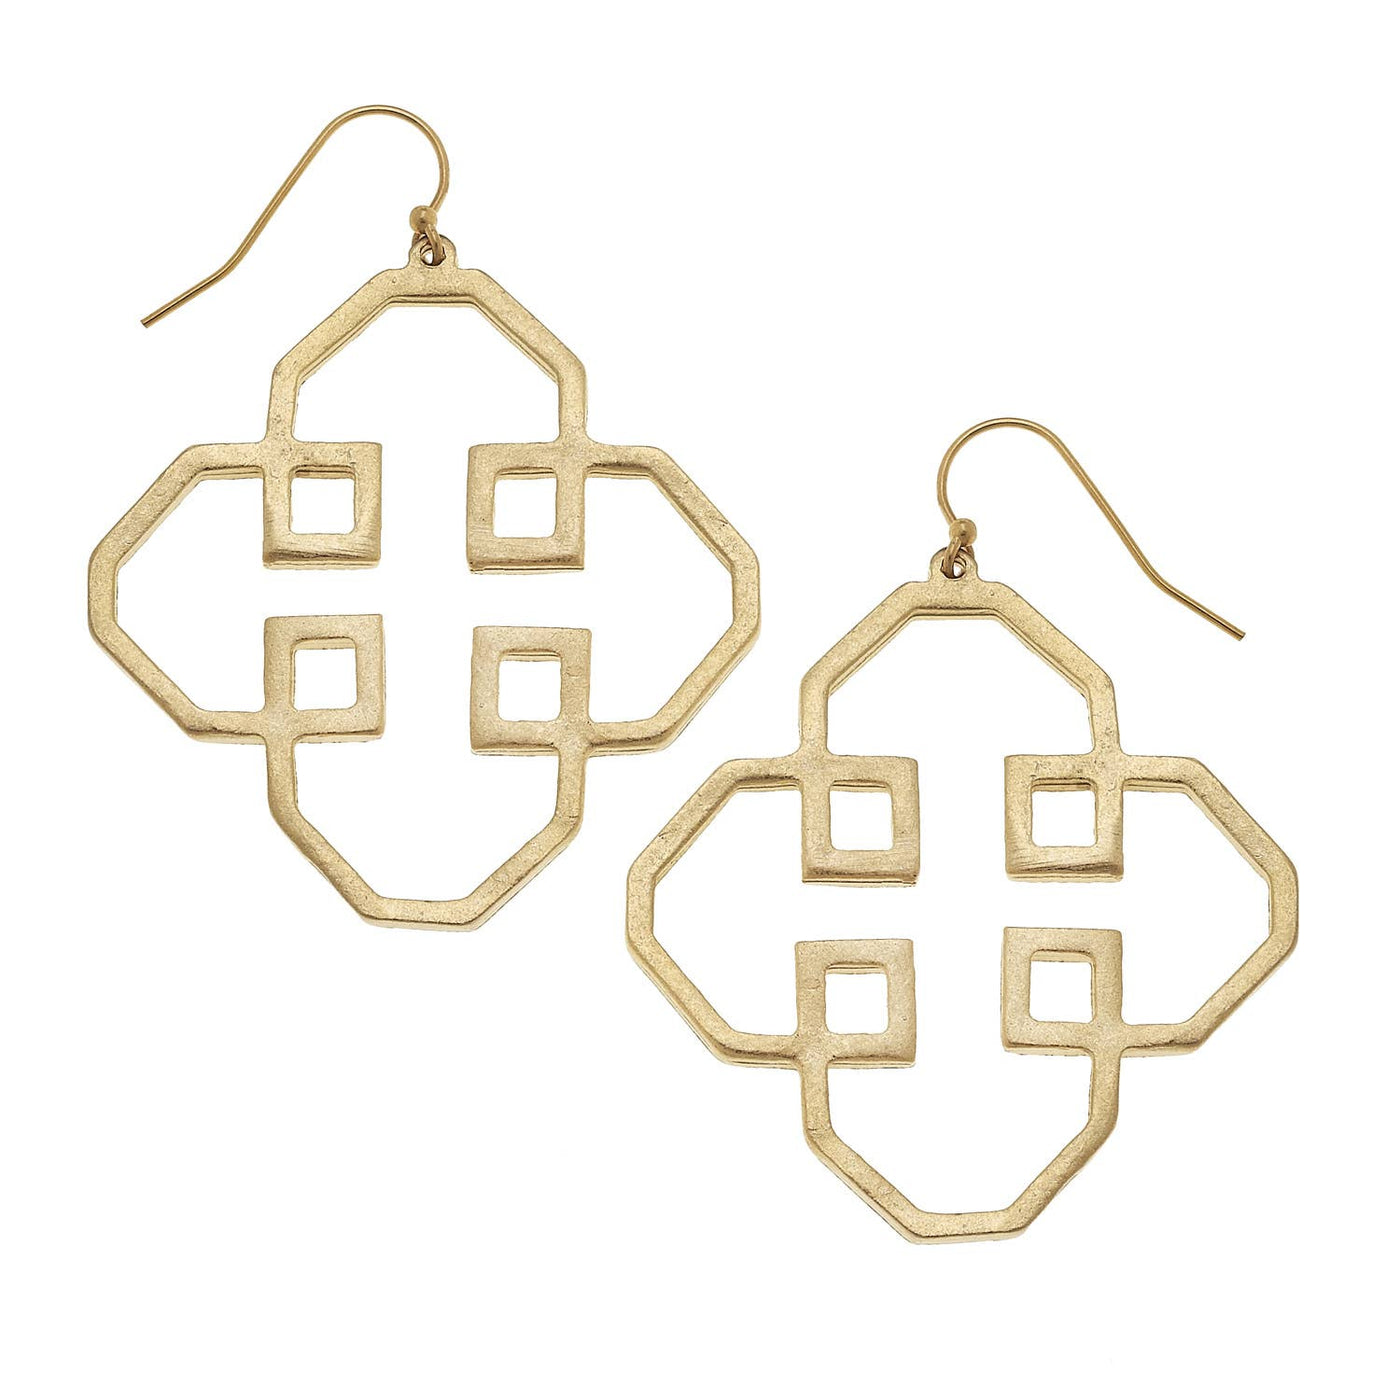 SS Gold Filigree Cut Out Earrings